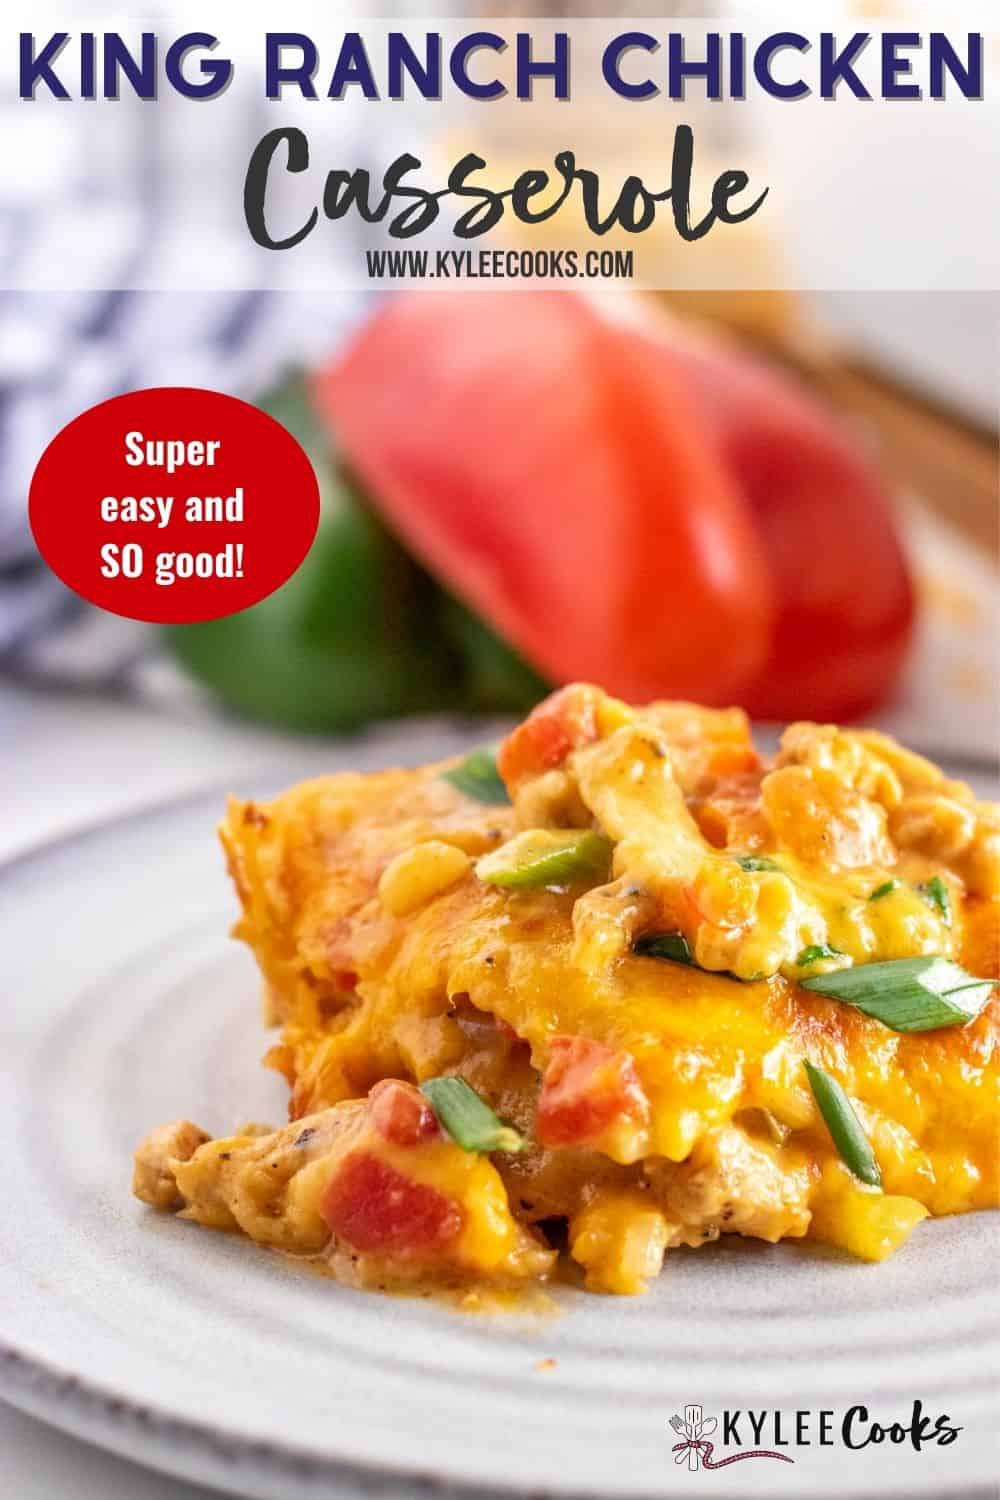 king ranch casserole with recipe name overlaid in text